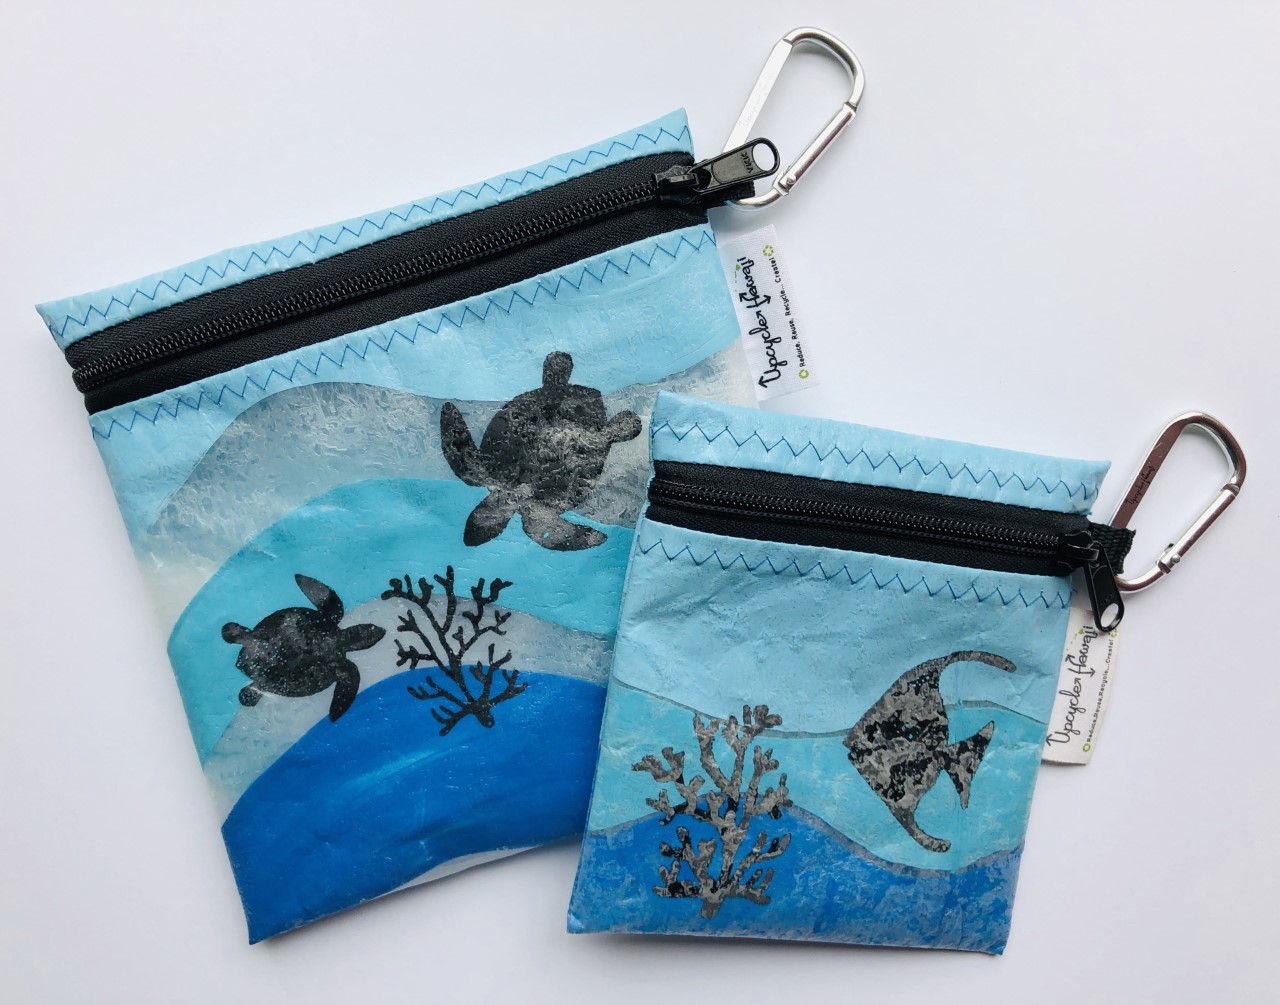 Hand-painted, fused plastic zipper pouches by Upcycle Hawaii. 